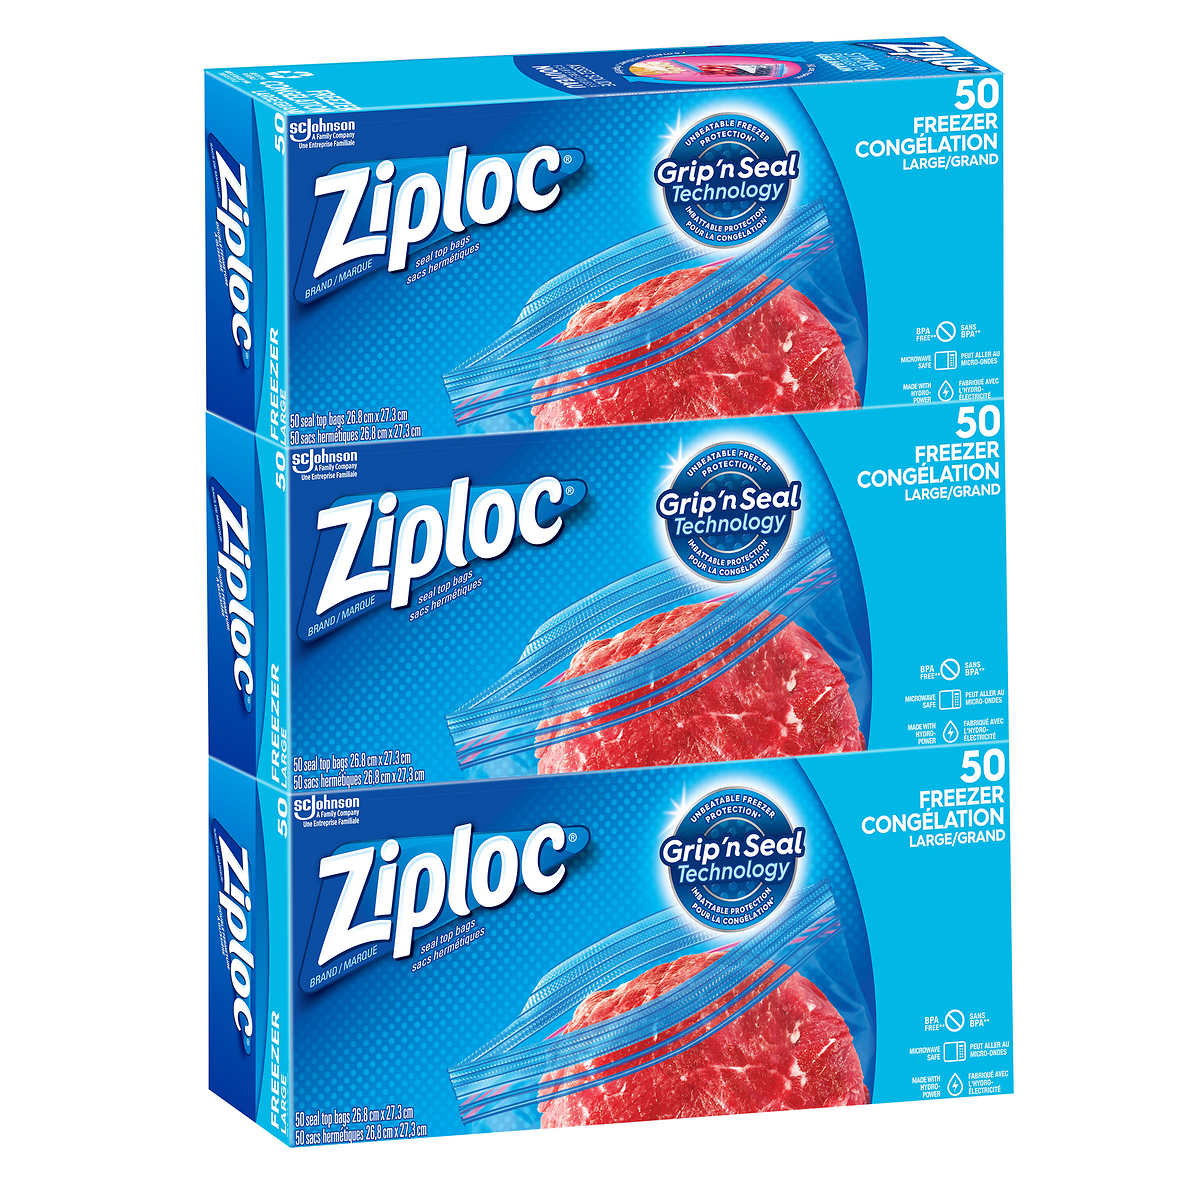 Ziploc Stand and Fill Big Bags, XL Big Bags, 4 Count Pack of 3 